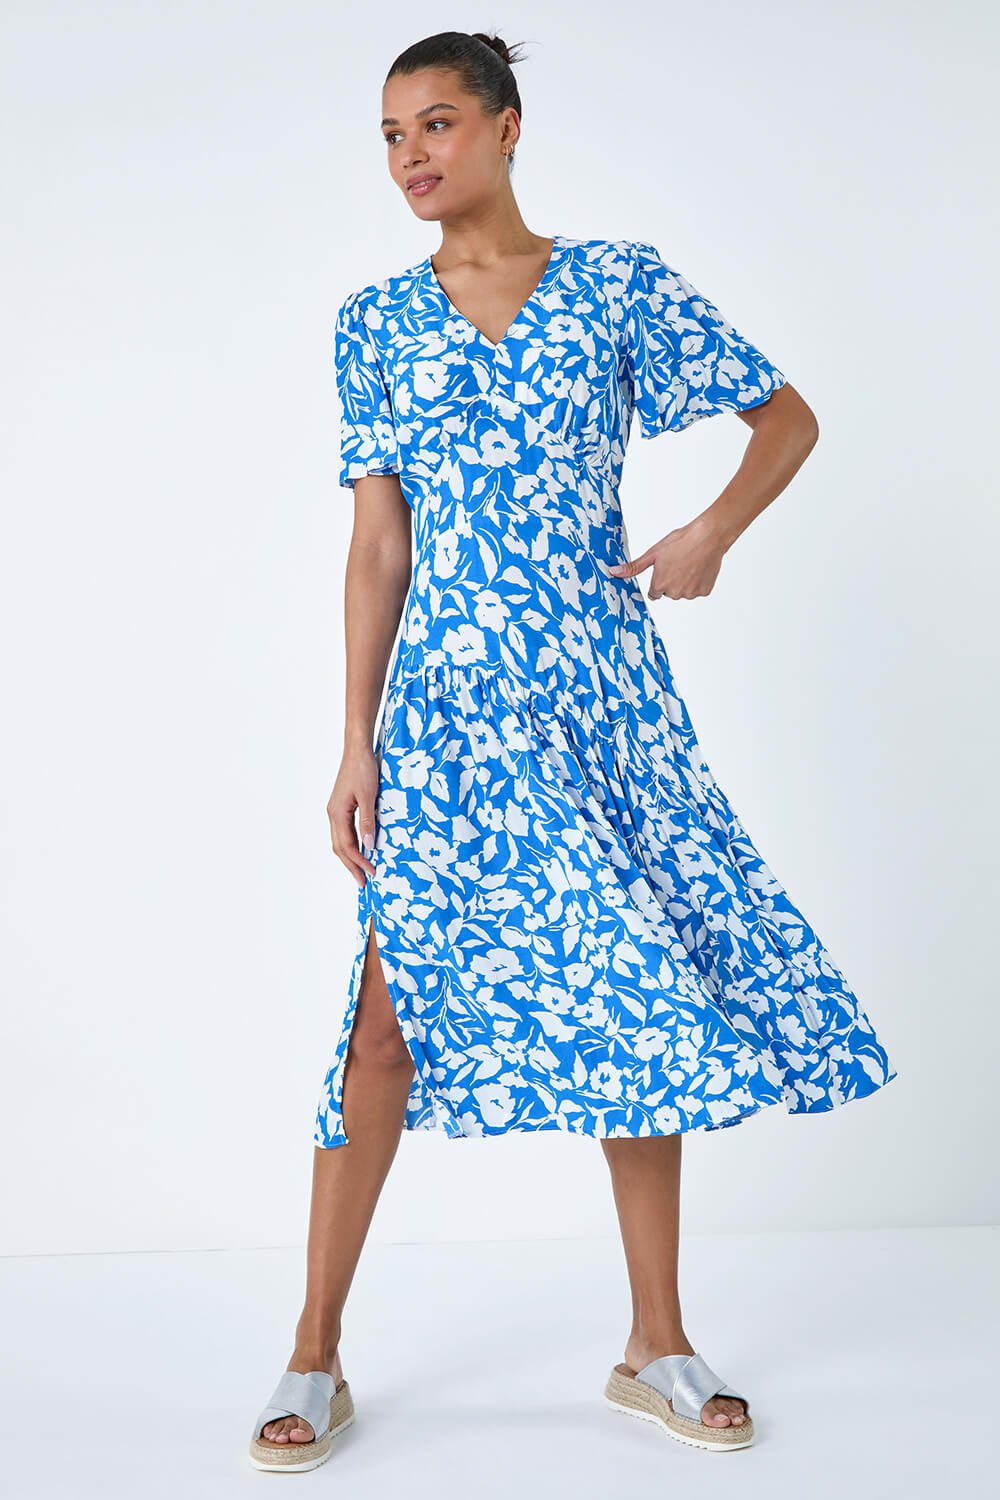 Blue Tiered Contrast Floral Print Dress, Image 2 of 5